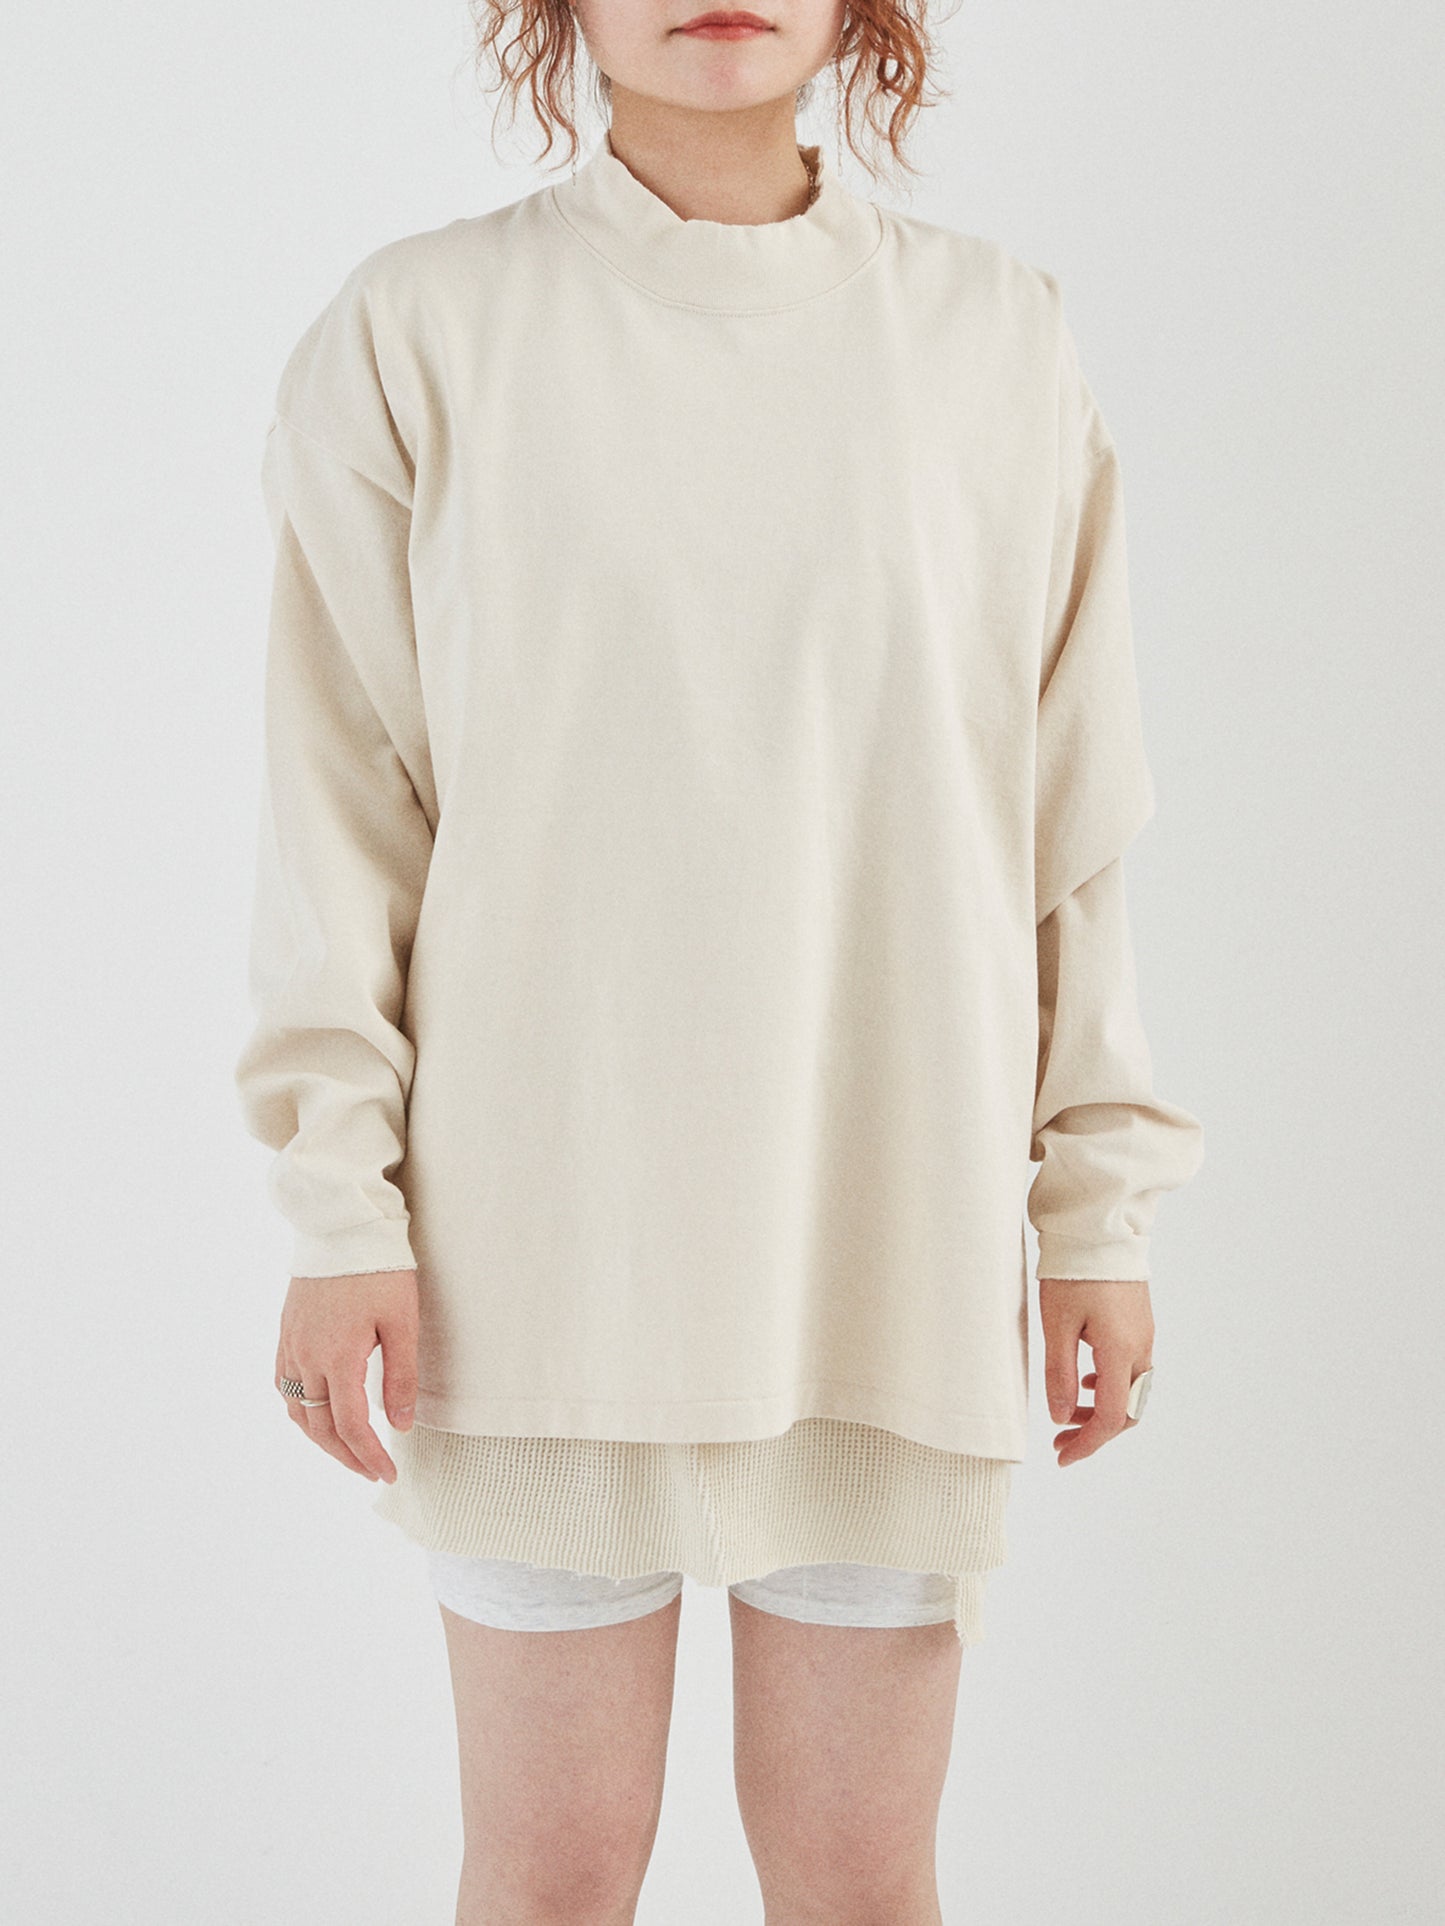 BAGGY L/S TEE COTTON JERSEY AM-C0207 Natural